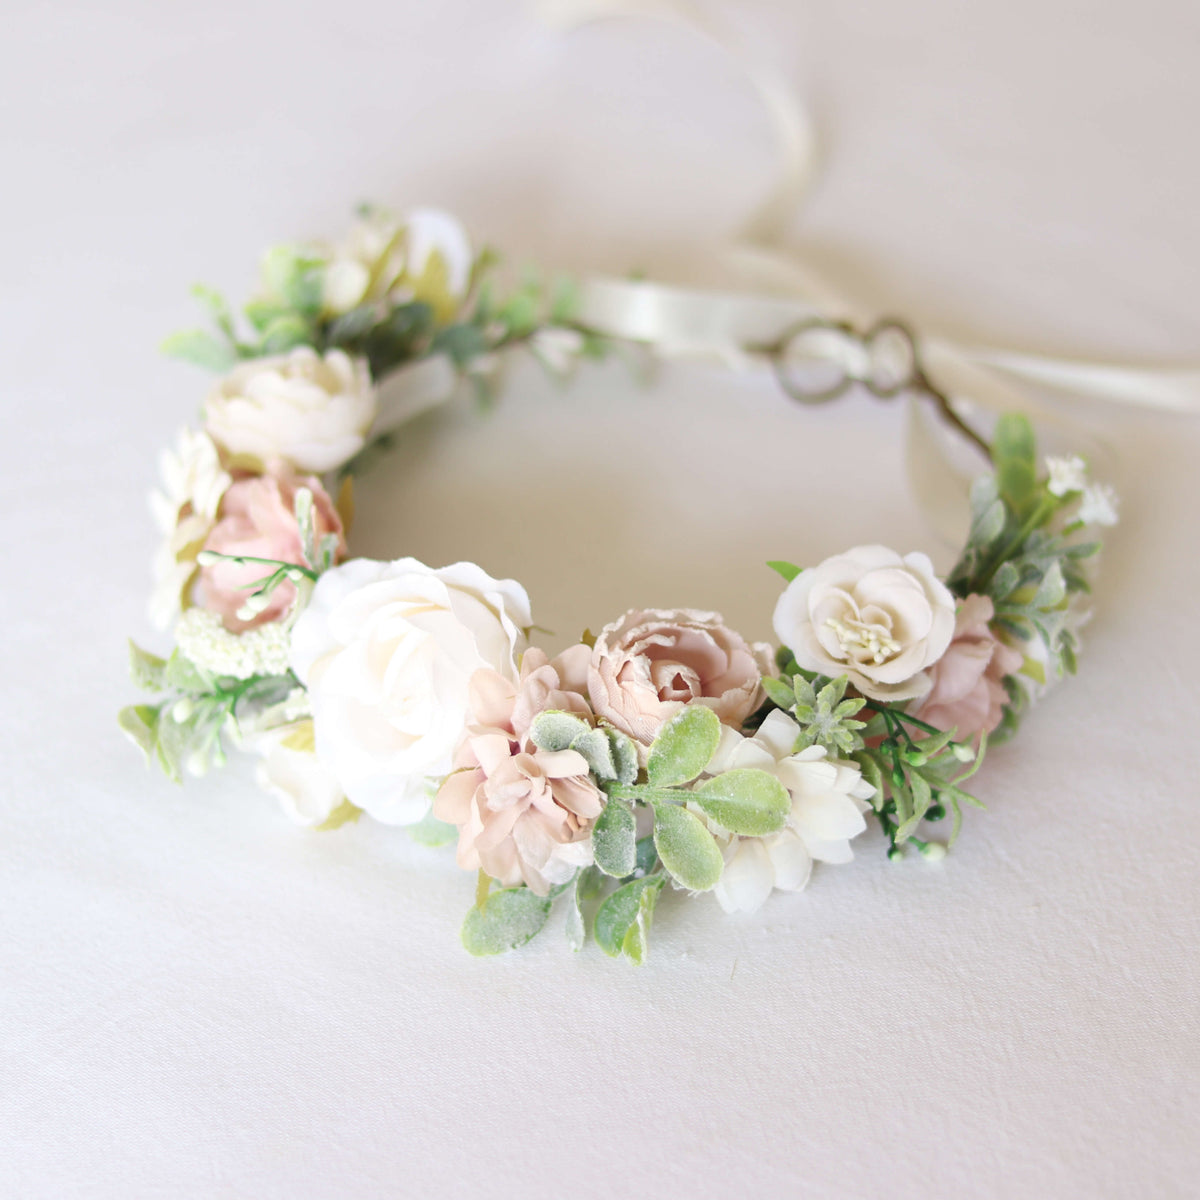 Daisy girls flower crown showing a central ivory flower, surrounded by smaller blush and ivory flowers, and green foliage. A tie back floral wreath with an ivory ribbon.